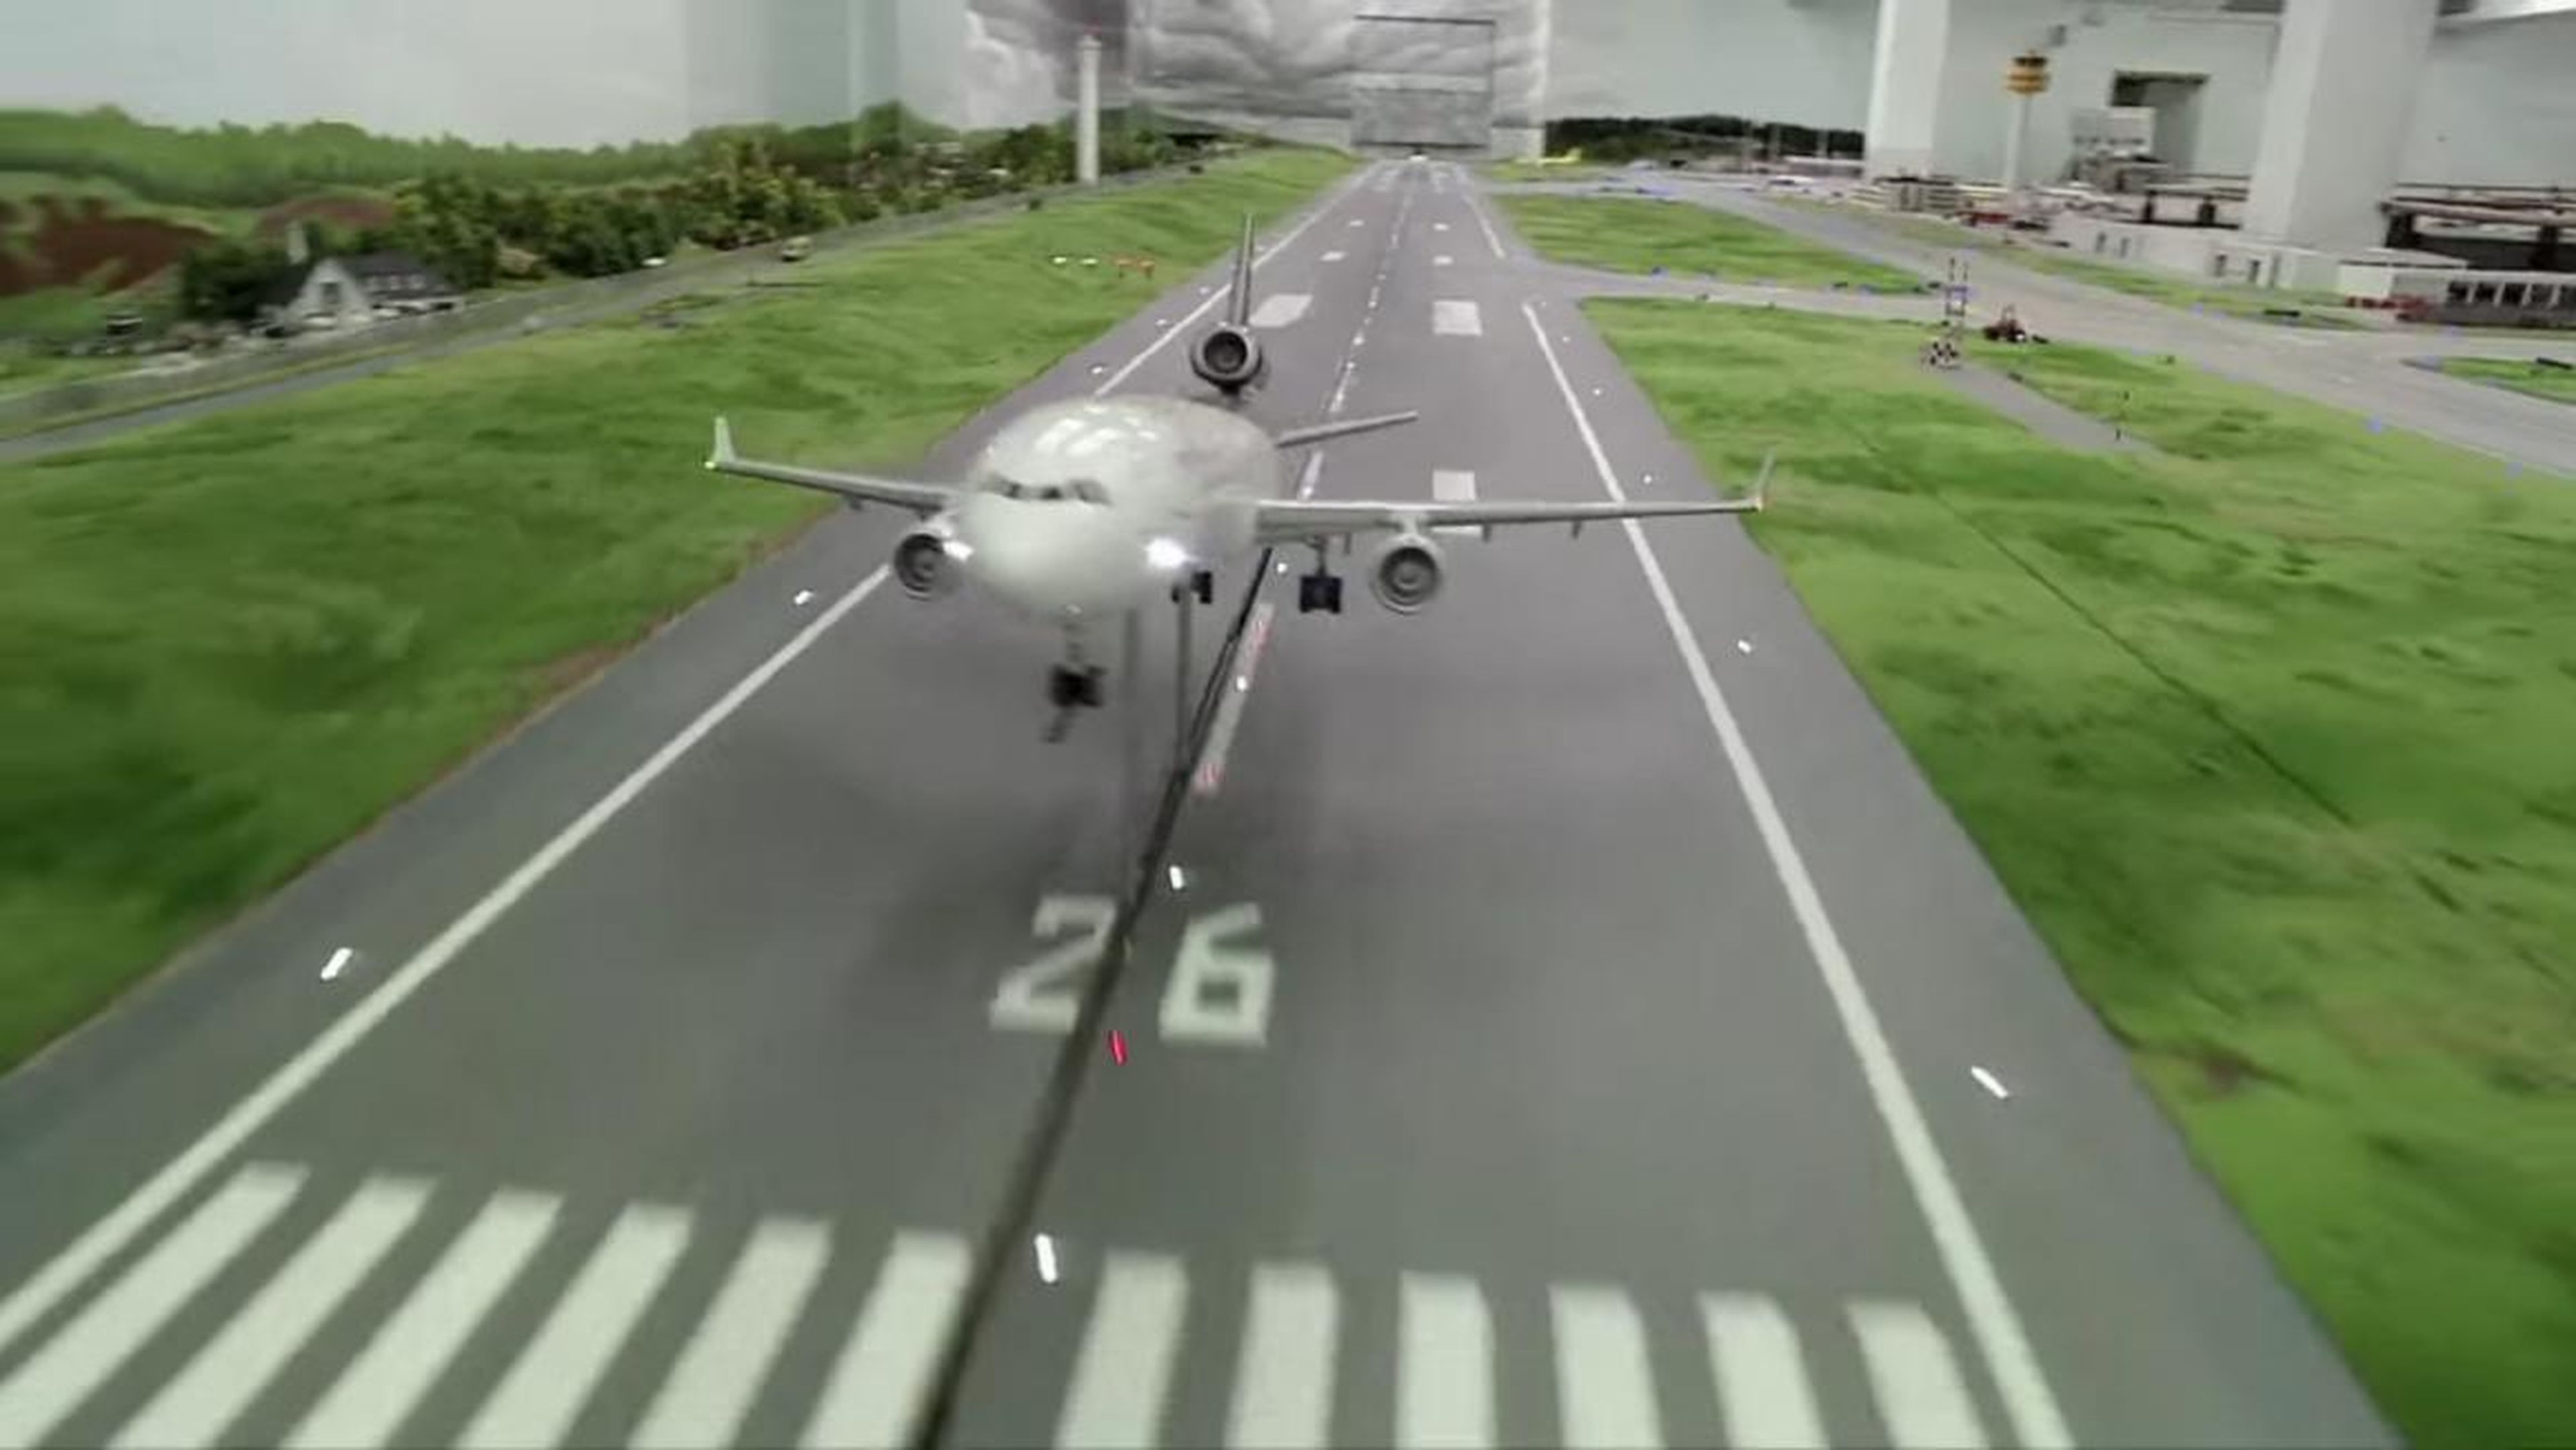 The model planes actually rise up as they speed down the track...